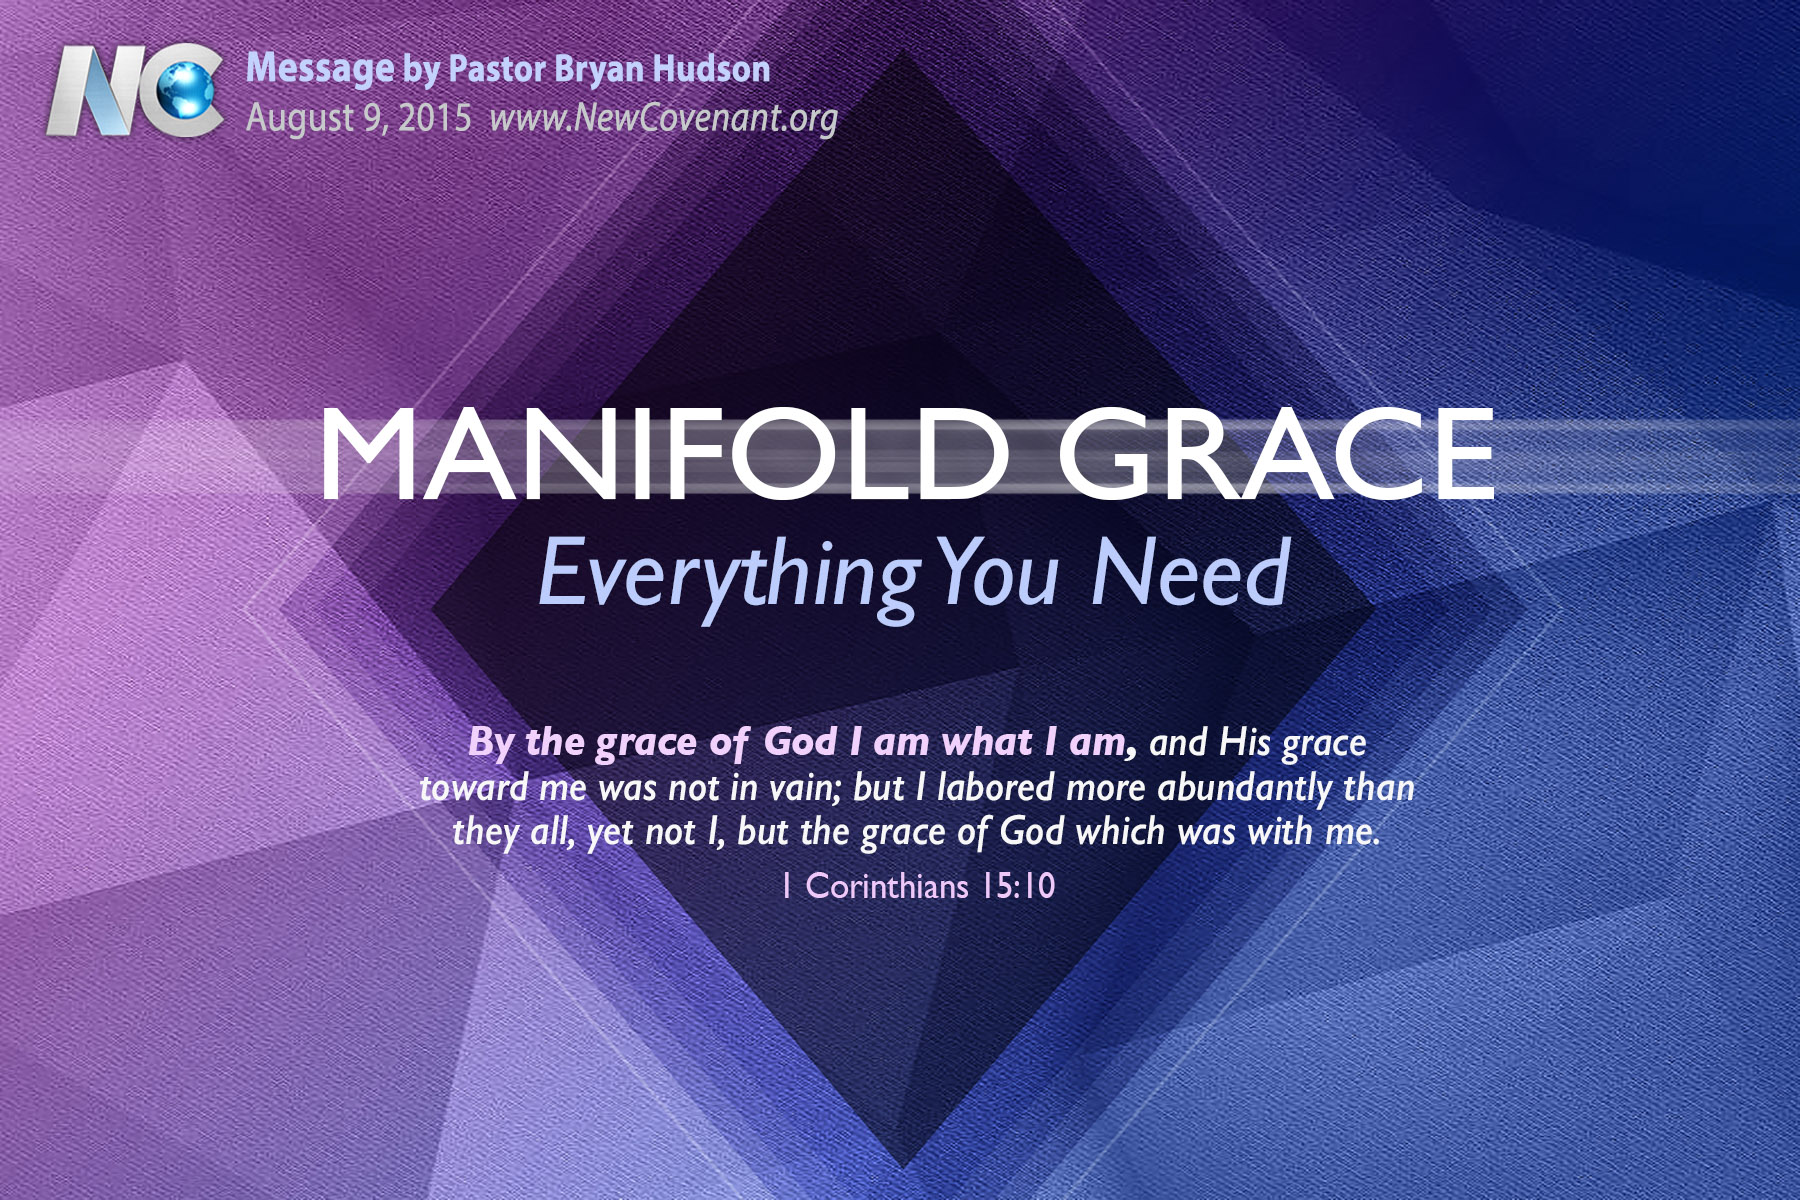 Manifold Grace | Pt. 2, Equipped & Empowered